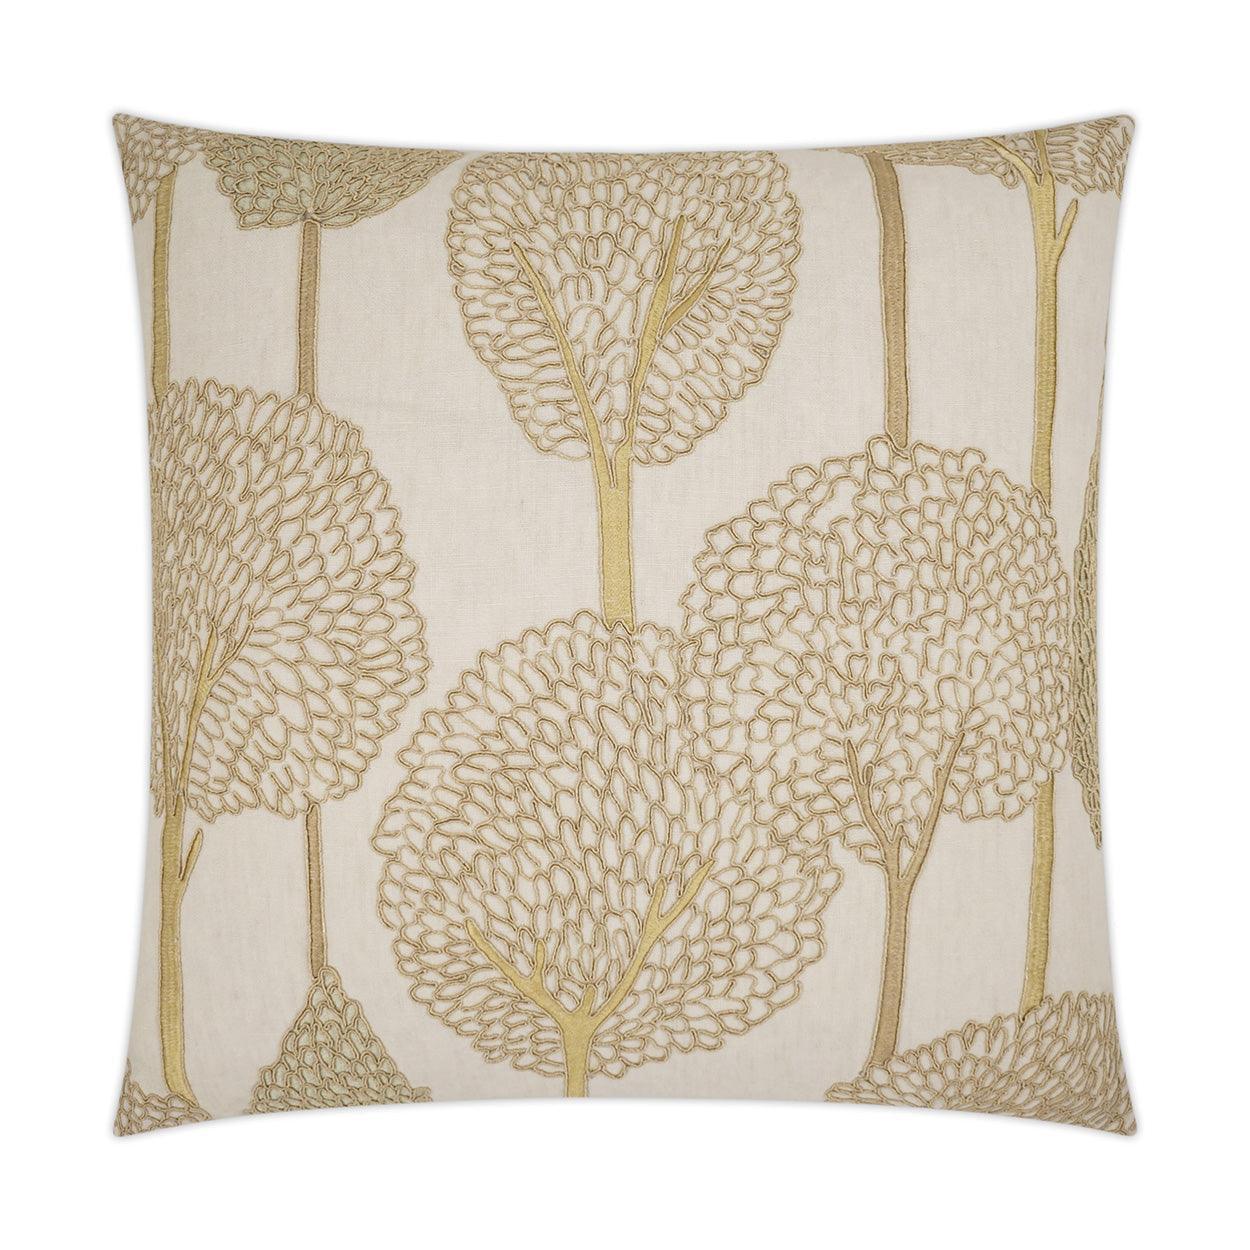 Pando Parchment Floral Embroidery Tan Taupe Large Throw Pillow With Insert - Uptown Sebastian